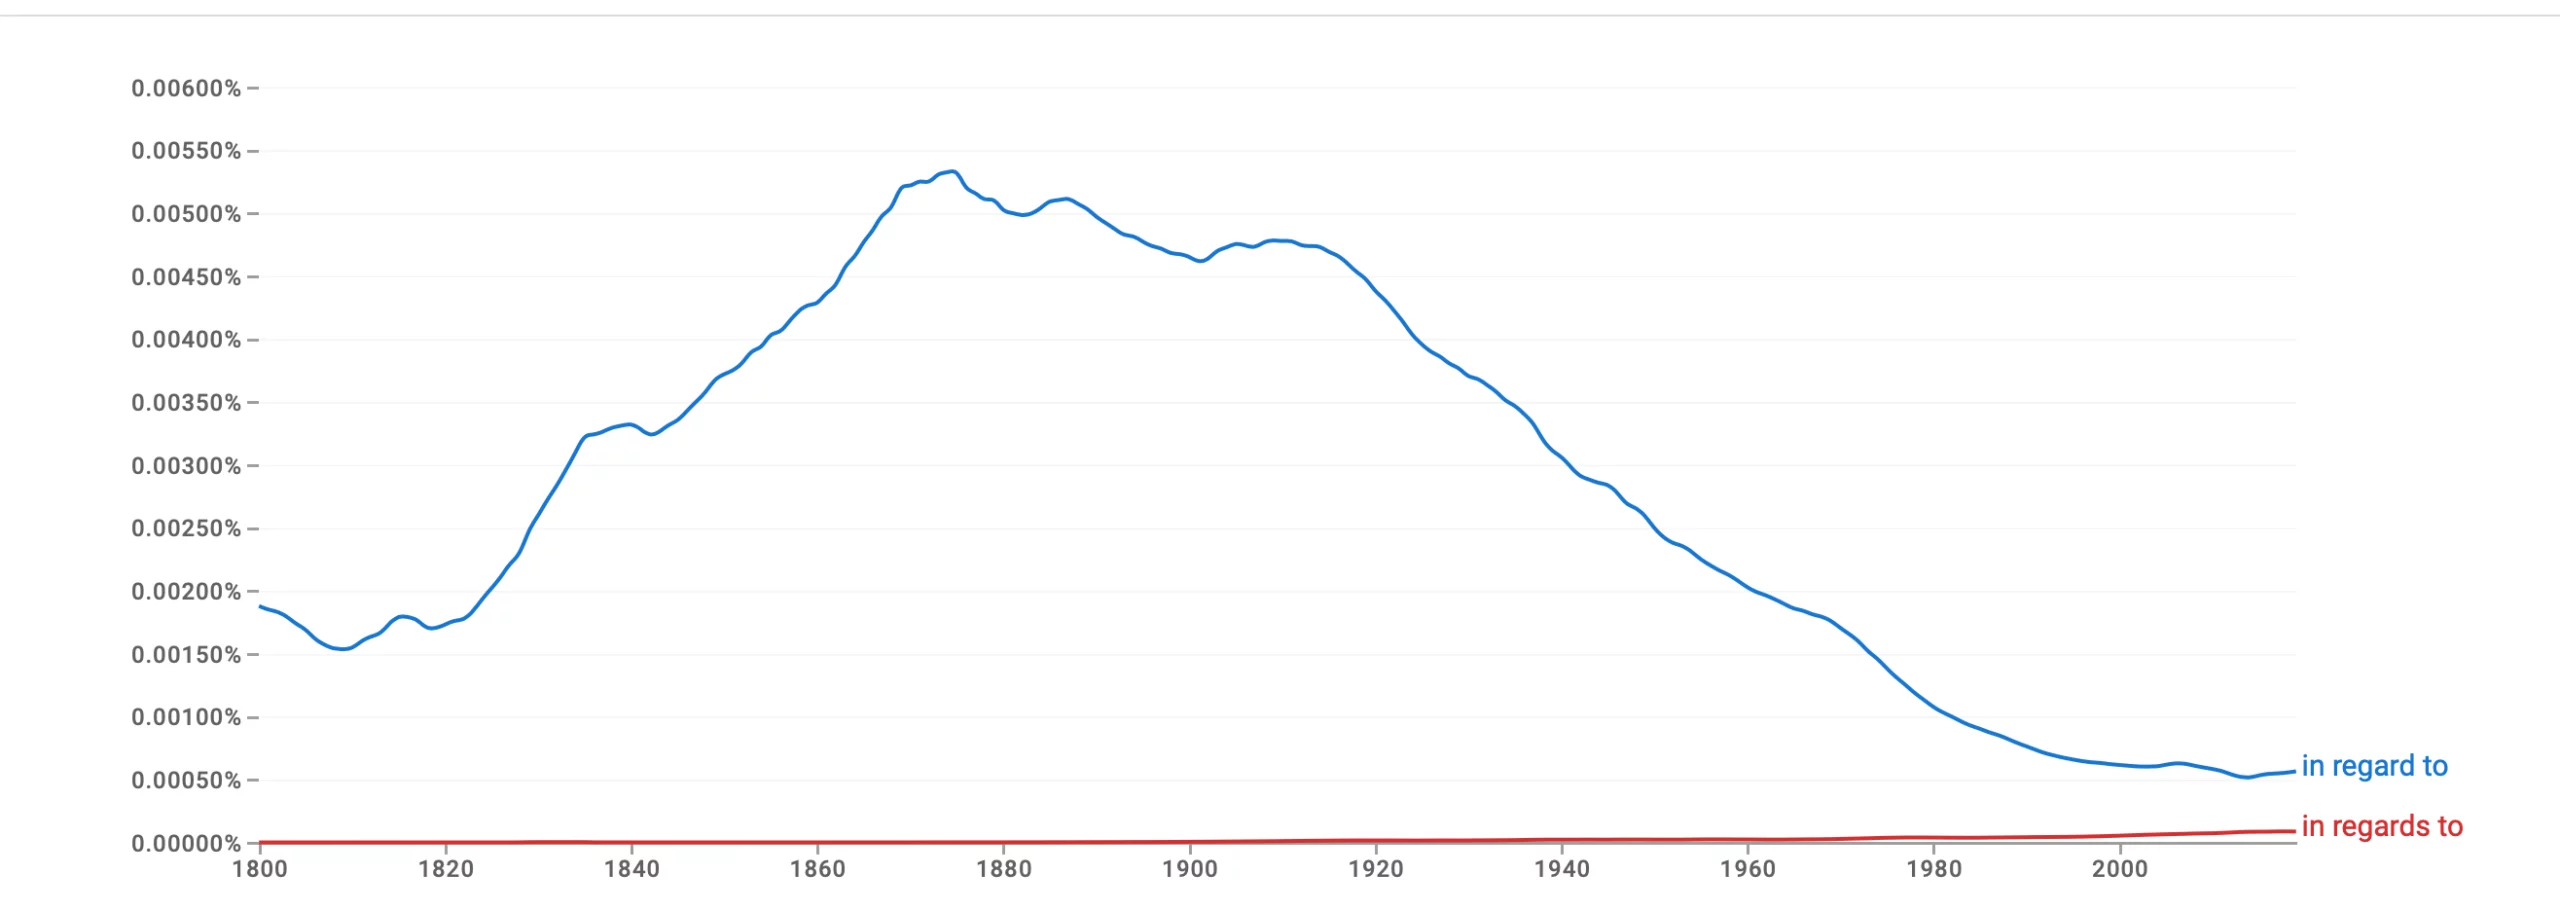 Google Ngram graph showing use of "in regard to" vs. "in regards to." "In regard to" is used more often.